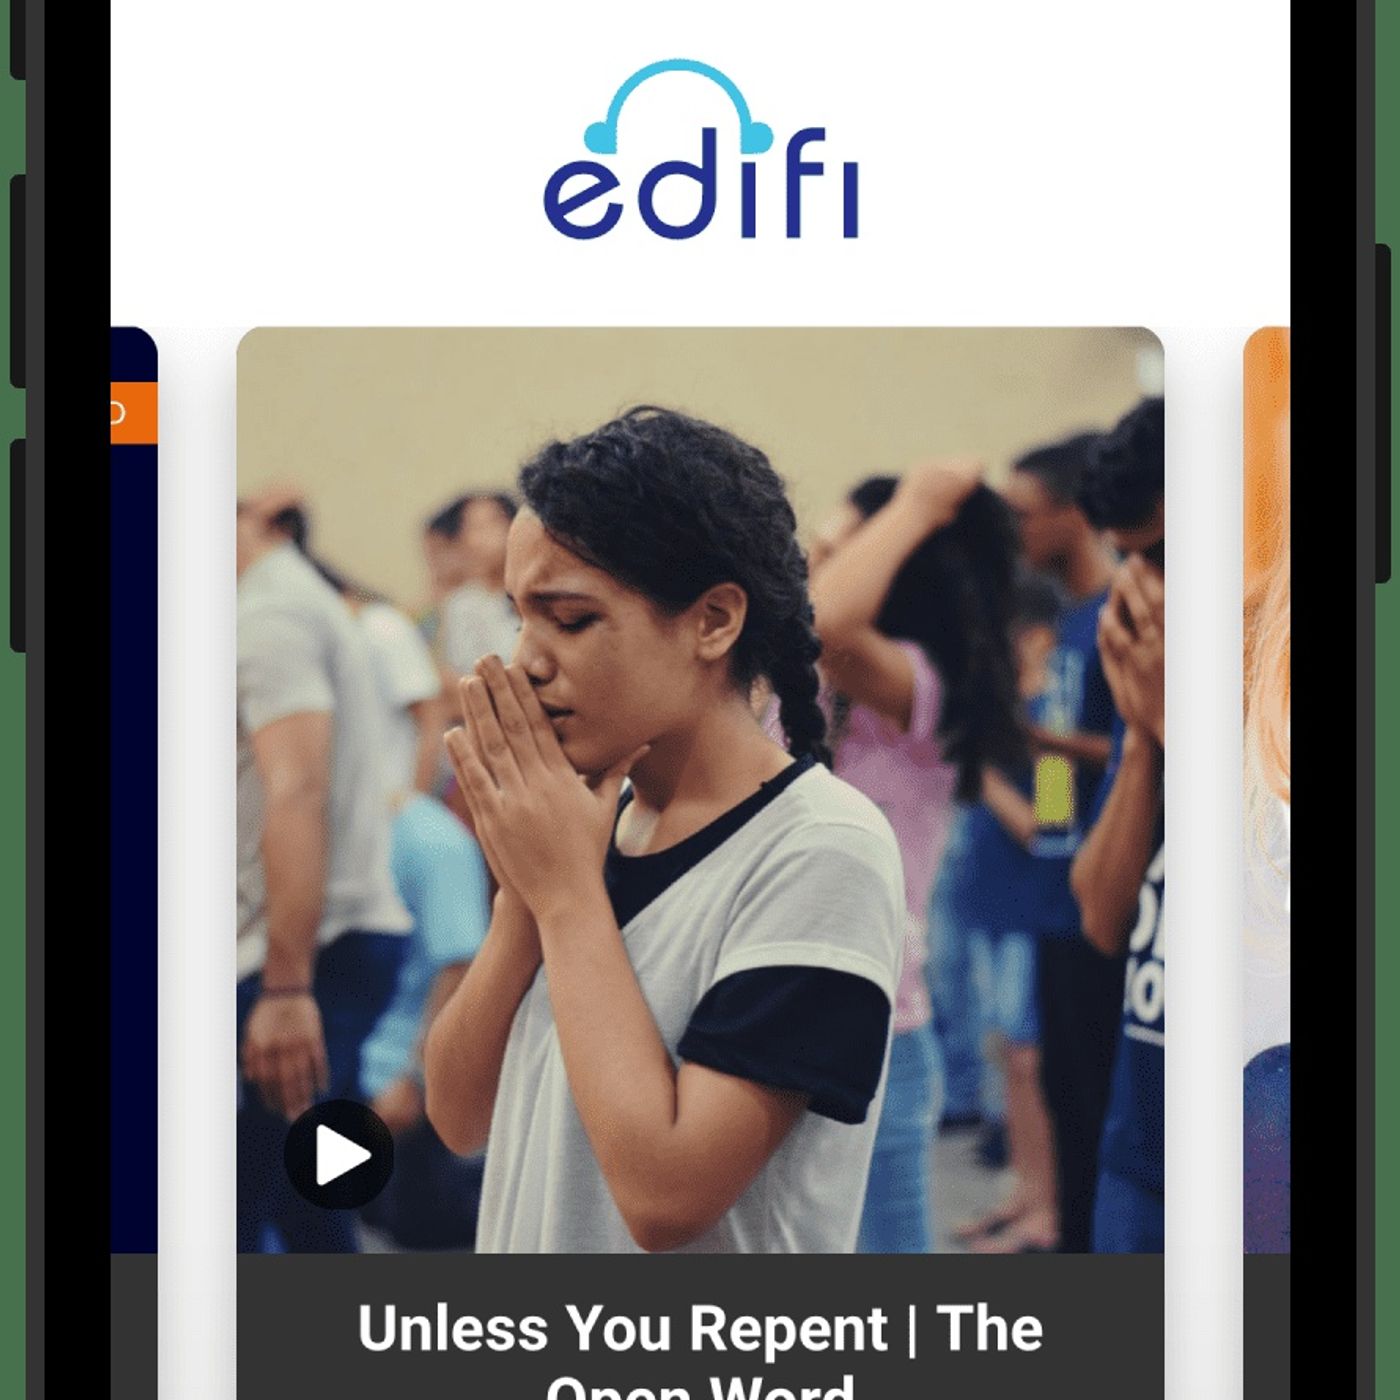 Edifi Podcast App and our Podpage